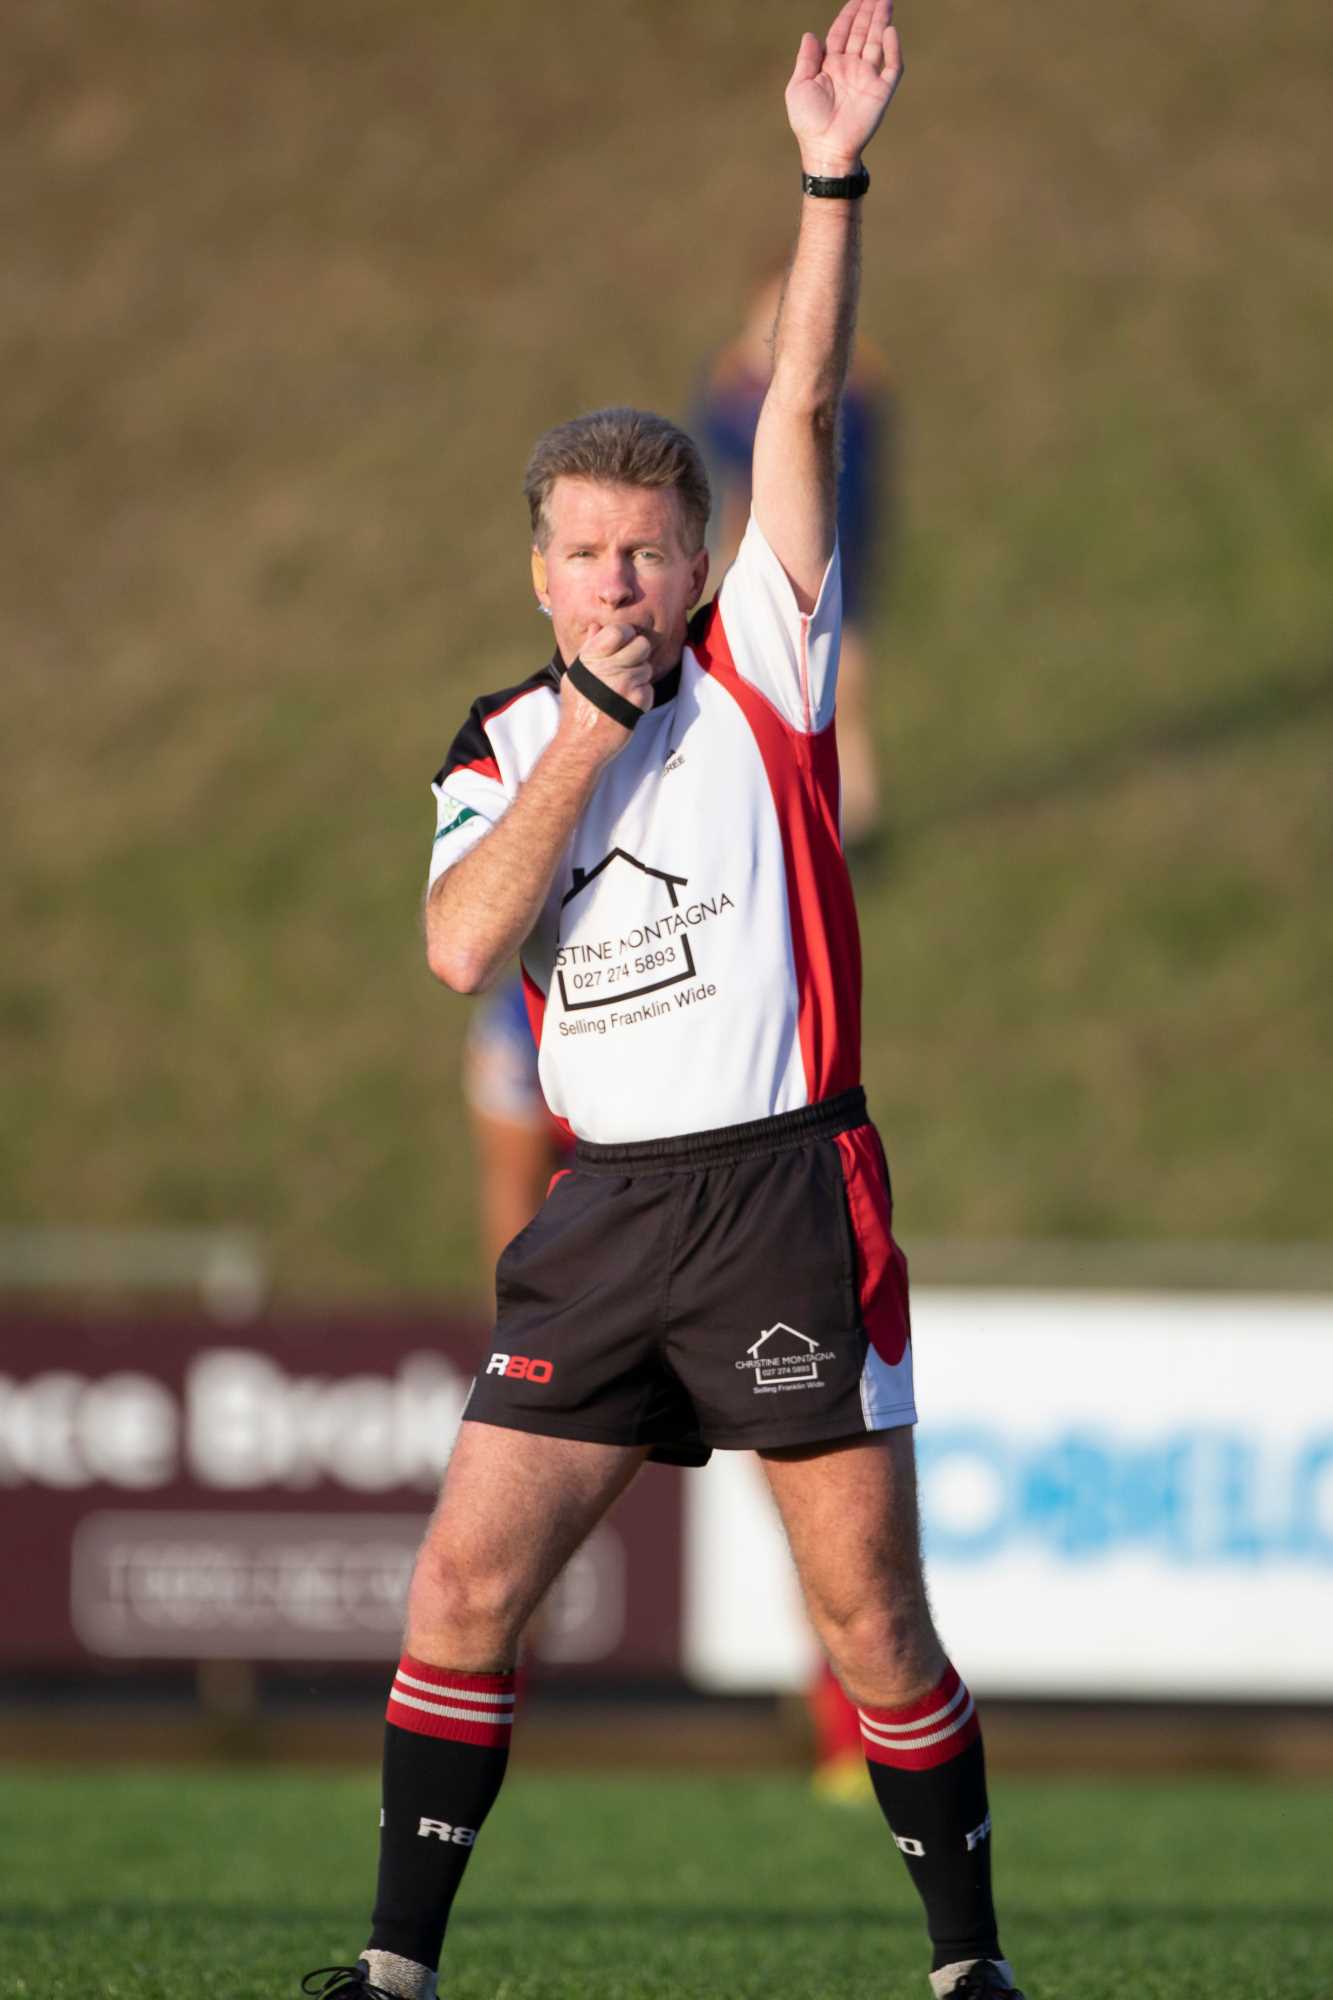 Referee John Wright starts the first spell of extra time after the scores were locked at 26 all after 80 mins. Counties Manukau McNamara Cup Premier 1 final between Ardmore Marist and Patumahoe, played at Navigation Homes Stadium, Pukekohe on Saturday July 21st 2018. Ardmore Marist won the game 52 - 26 after 20 minutes of extra time had to be played to find a winner. The halftime score was 21 all and at full time (80 minutes) it was 26 all.
Photo by Richard Spranger.